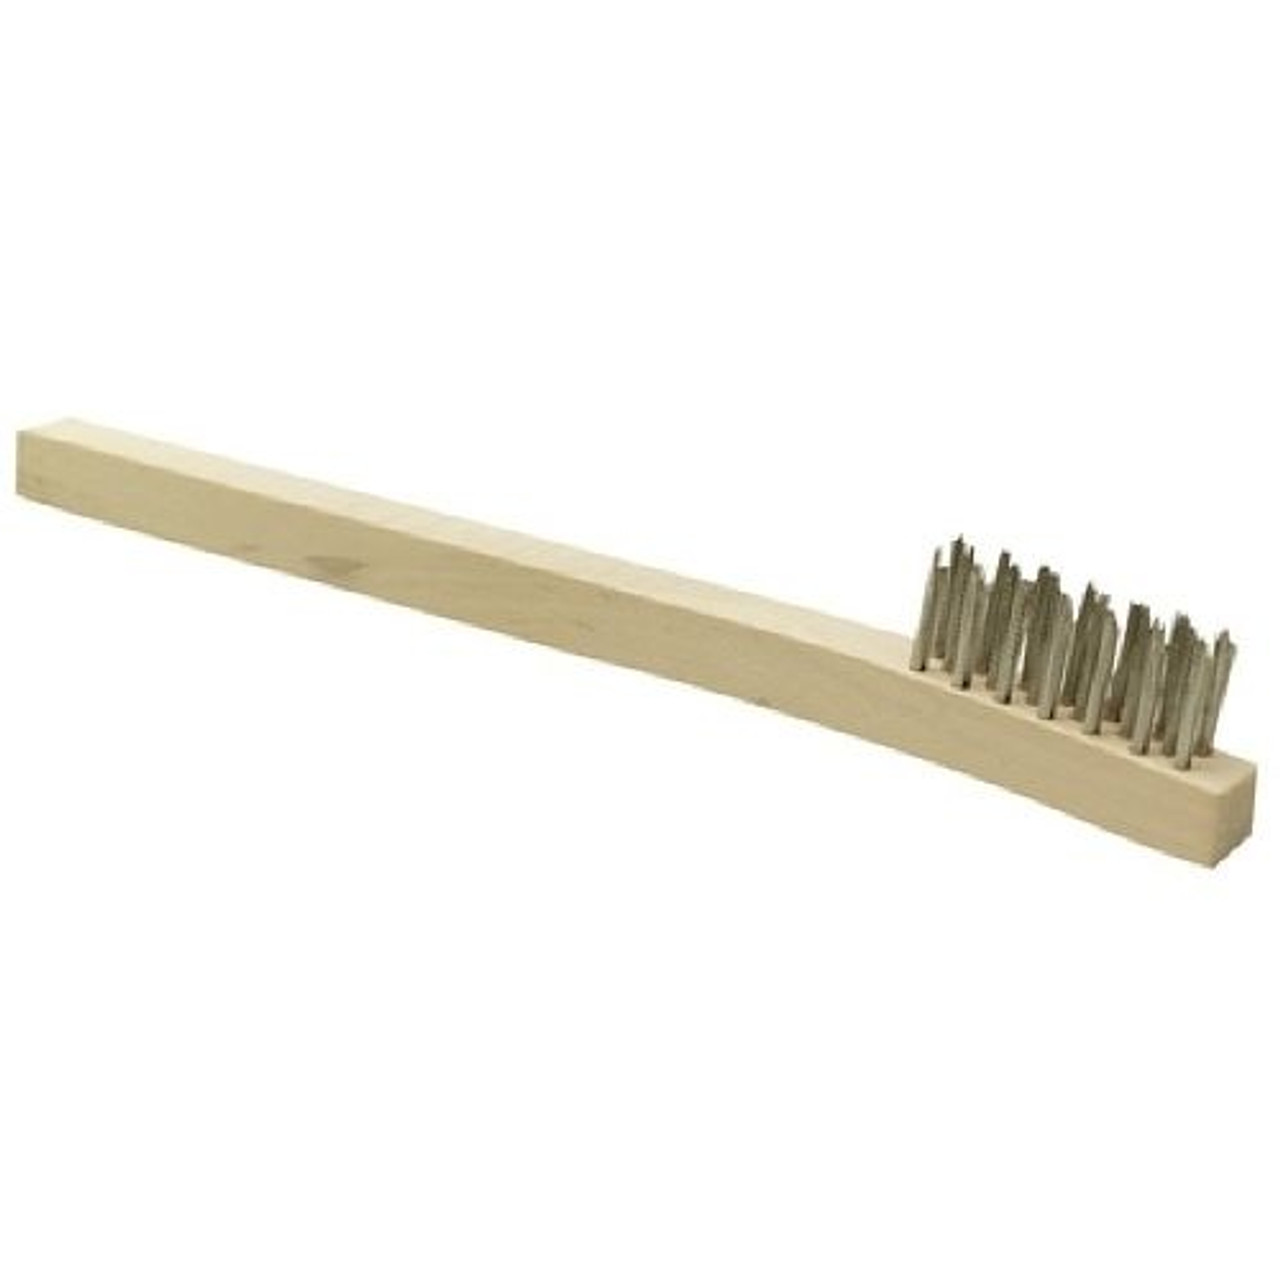 Seachoice 7-3/4 Inch Long Wooden Handle Stainless Steel Bristle Wire Brush